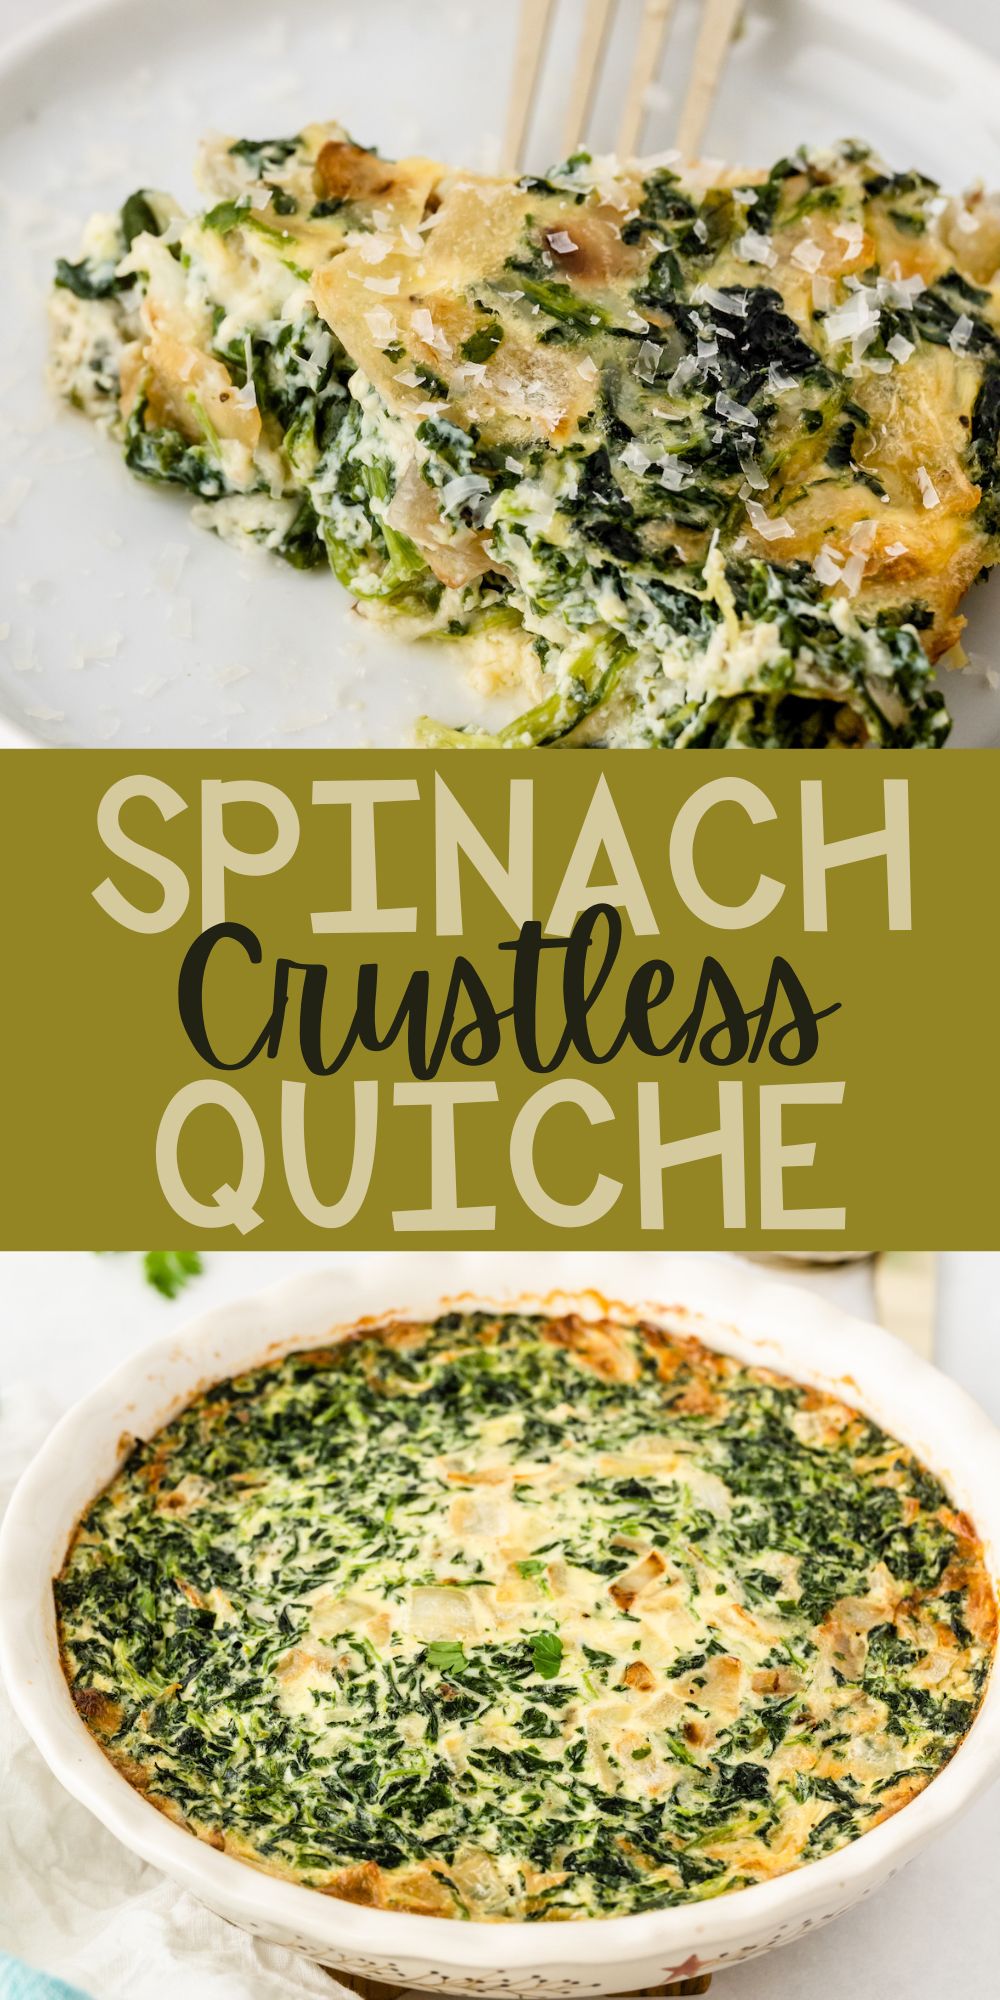 two photos of quiche made with spinach in a white dish with words on the image.